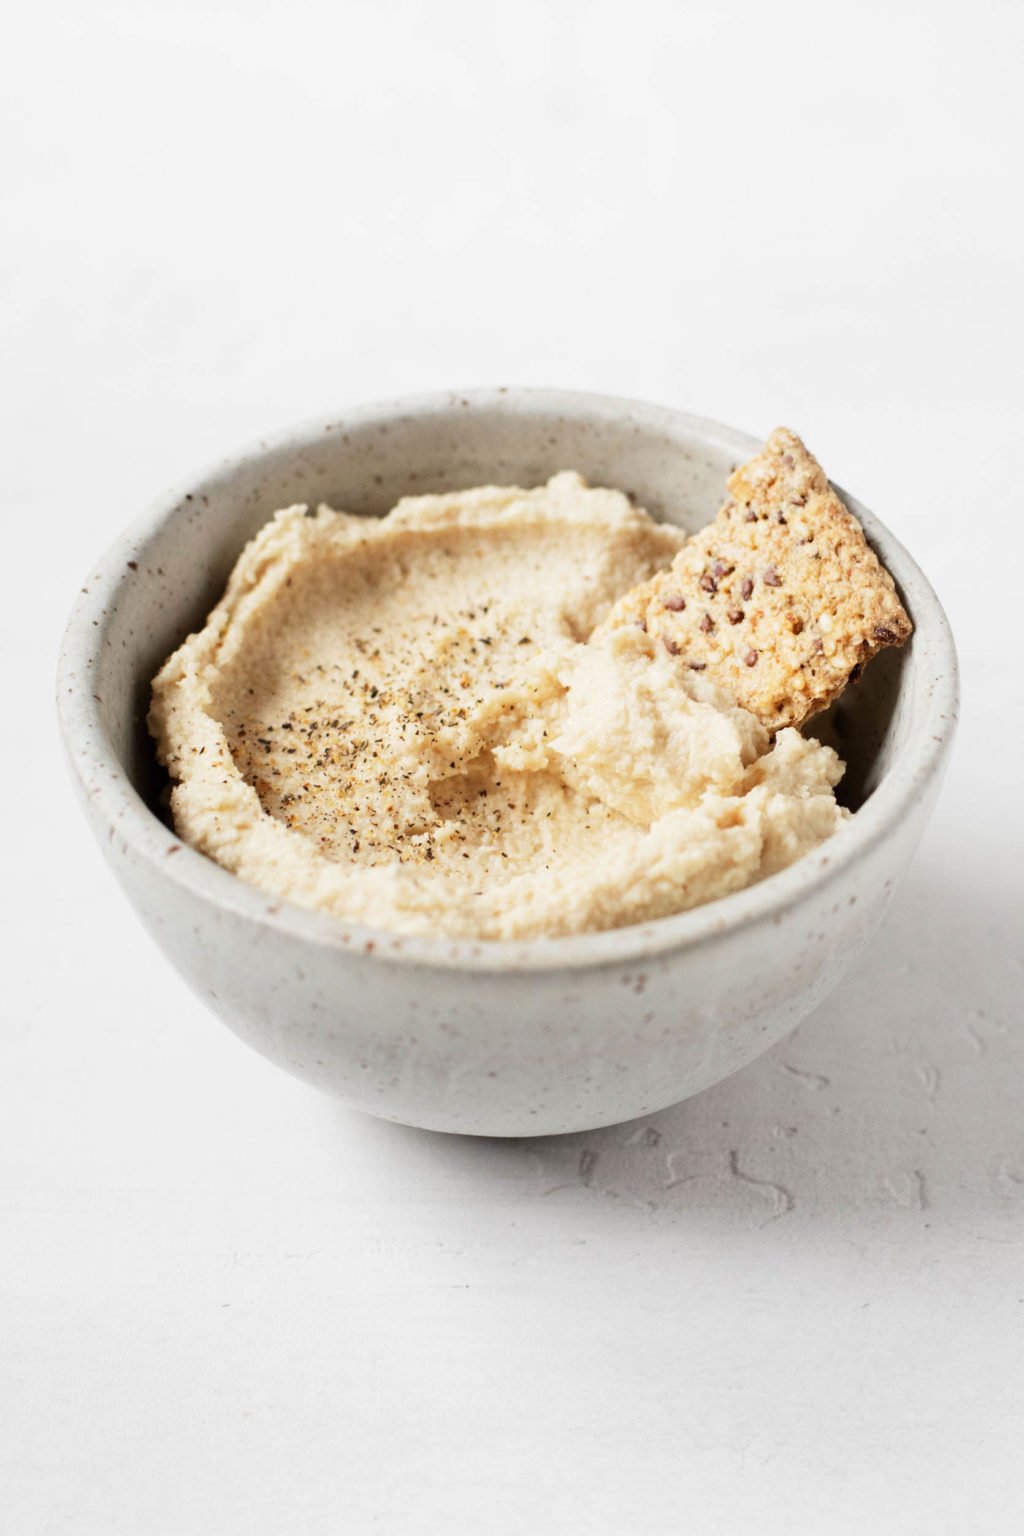 A small ceramic bowl holds a creamy vegan cashew cheese and a cracker for dipping.